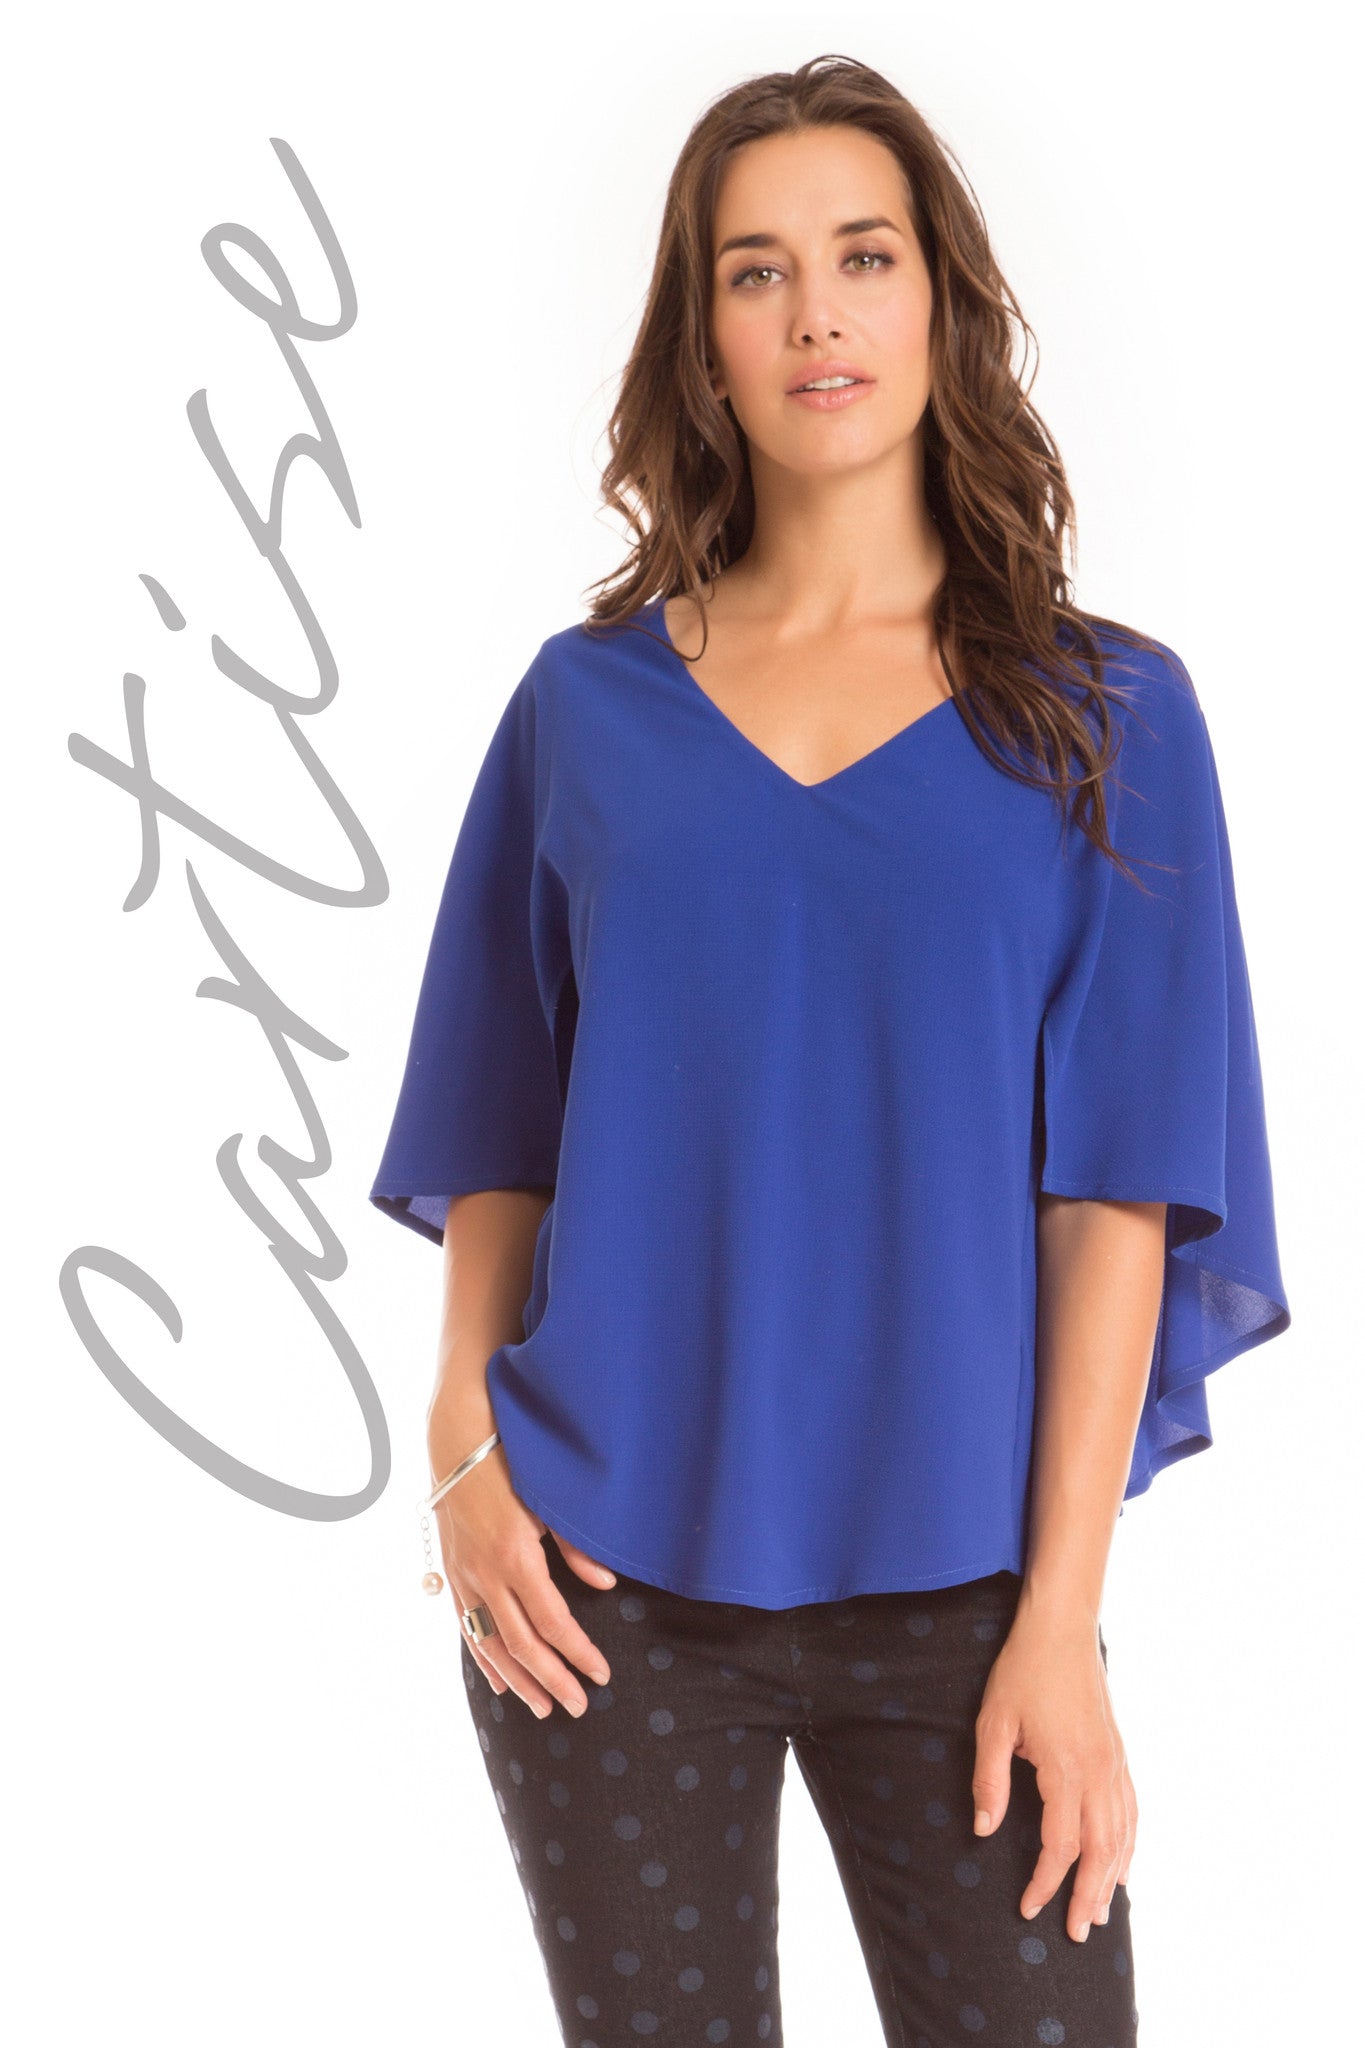 Cartise Tops, Cartise Dresses, Cartise Fall 2016, Cartise Online Shop ...